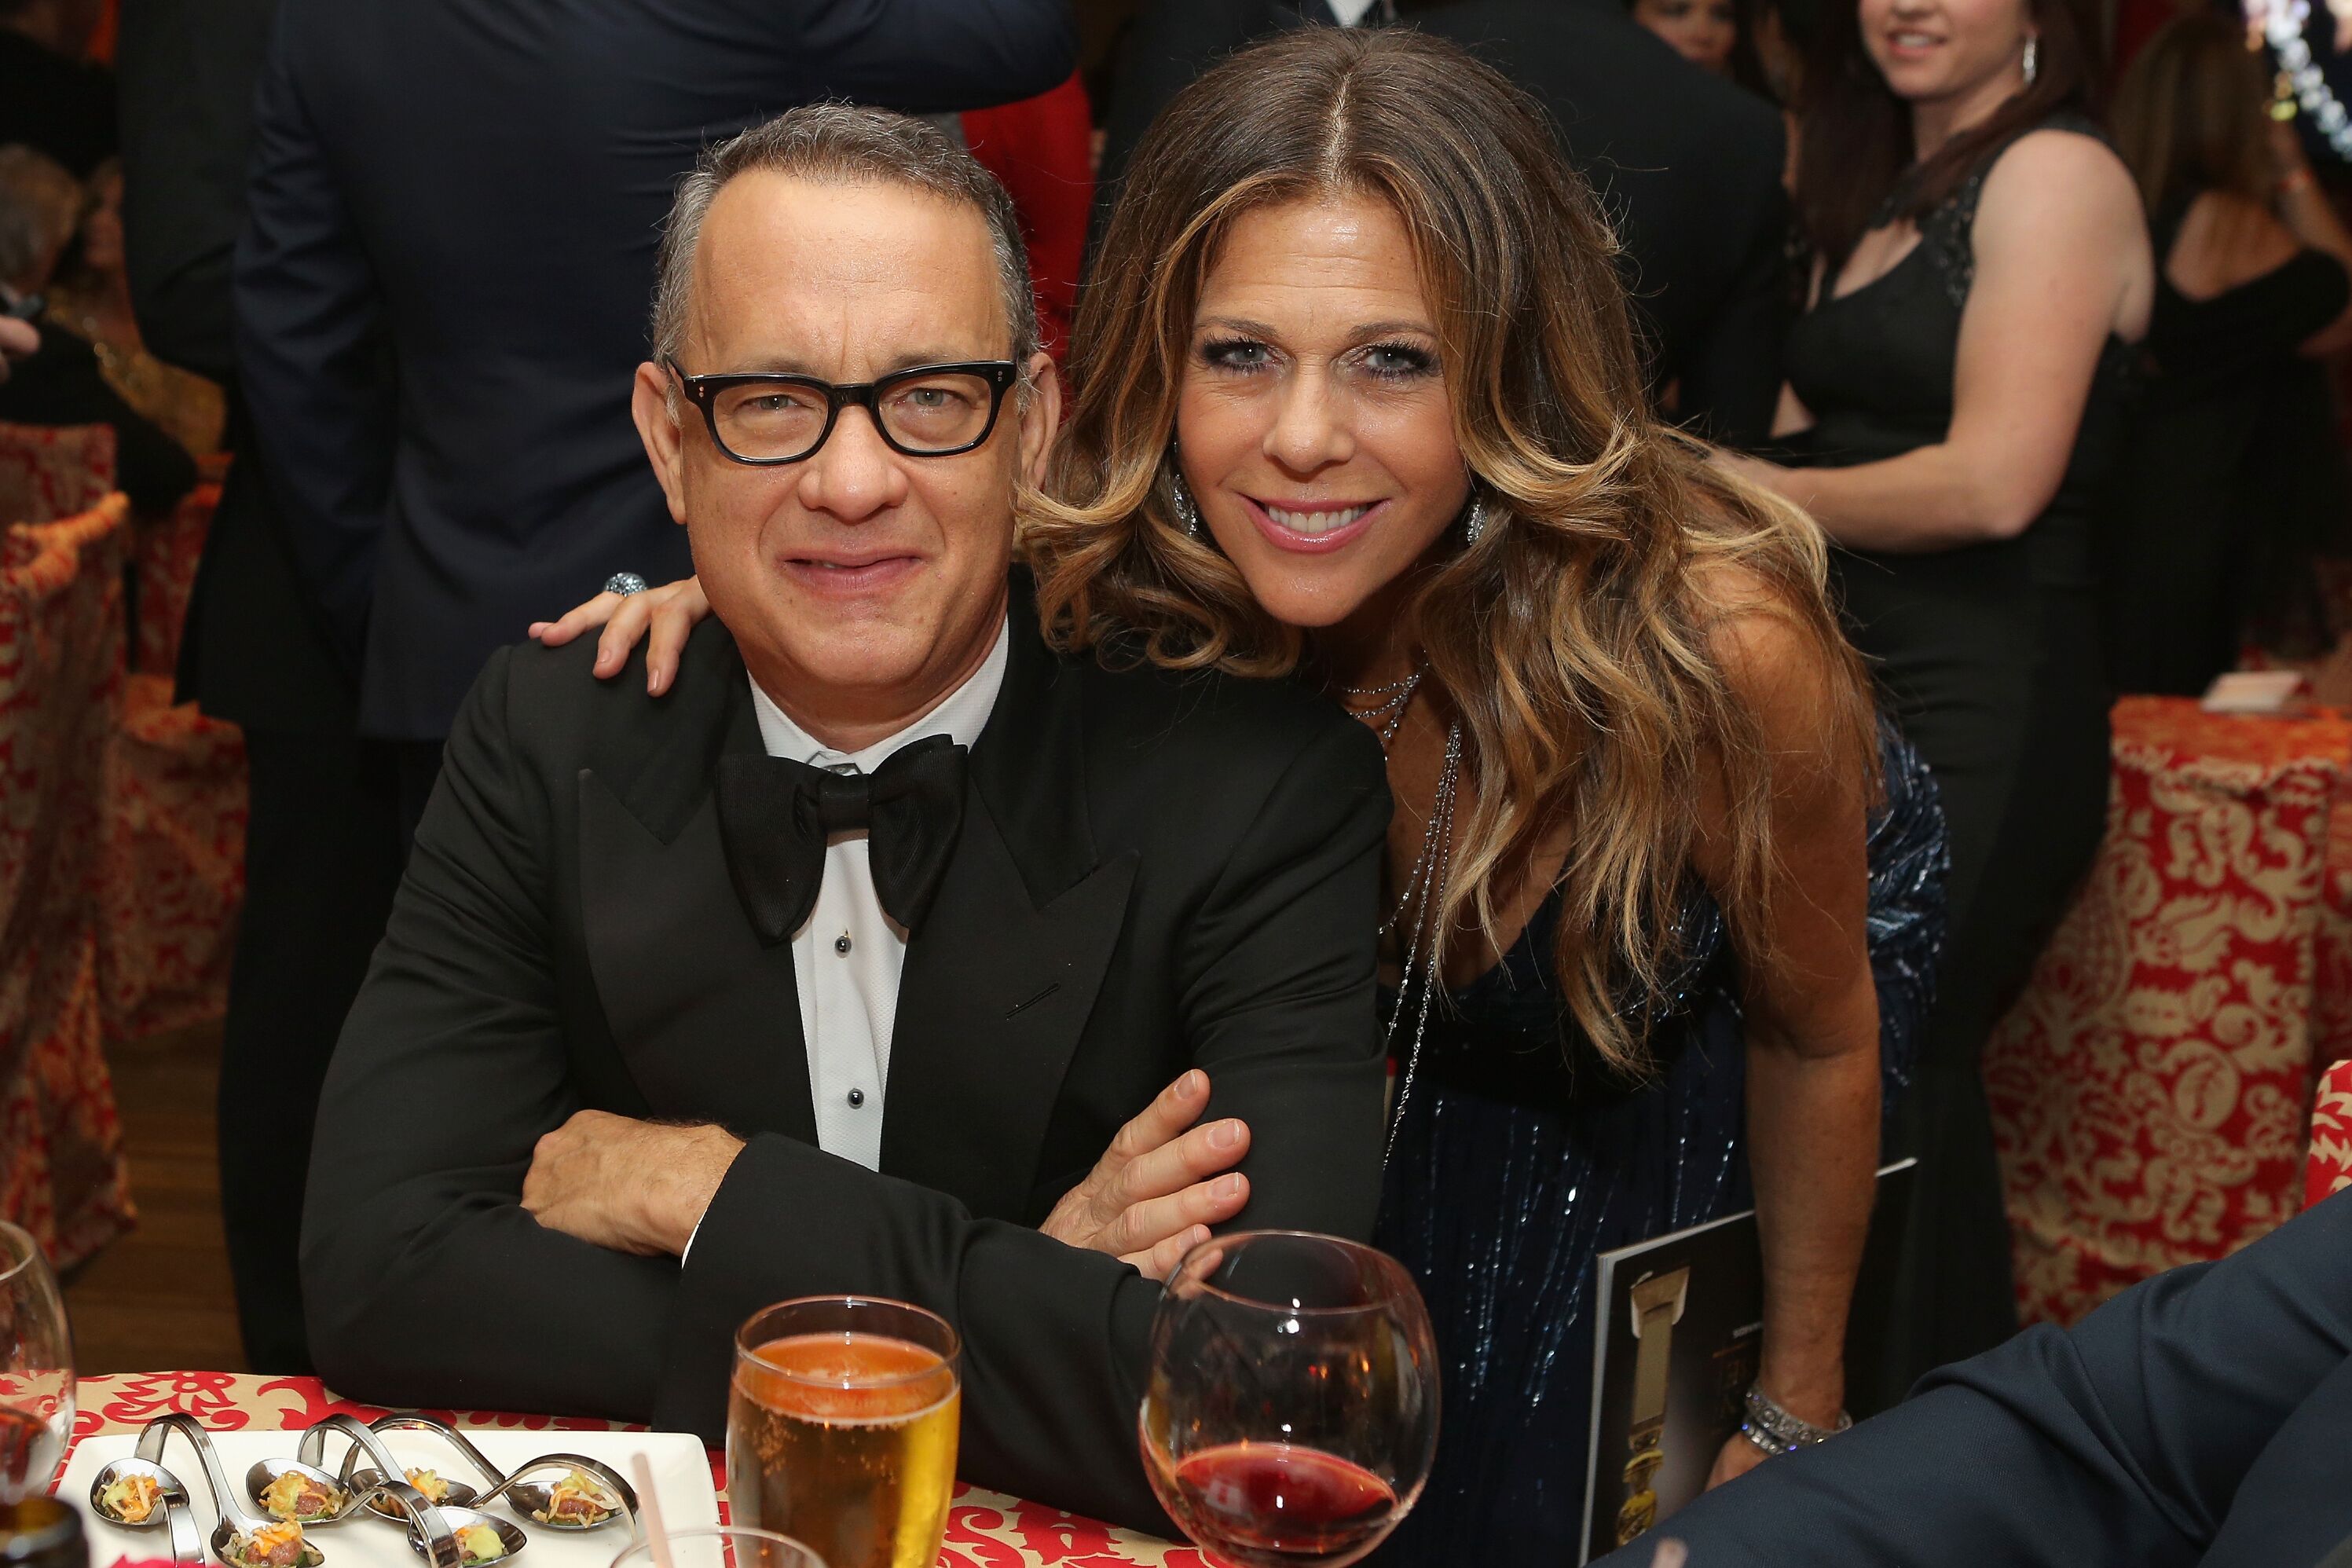 Tom Hanks and Rita Wilson at HBO's Post-Golden Globe Awards Party in 2014 | Source; Getty Images